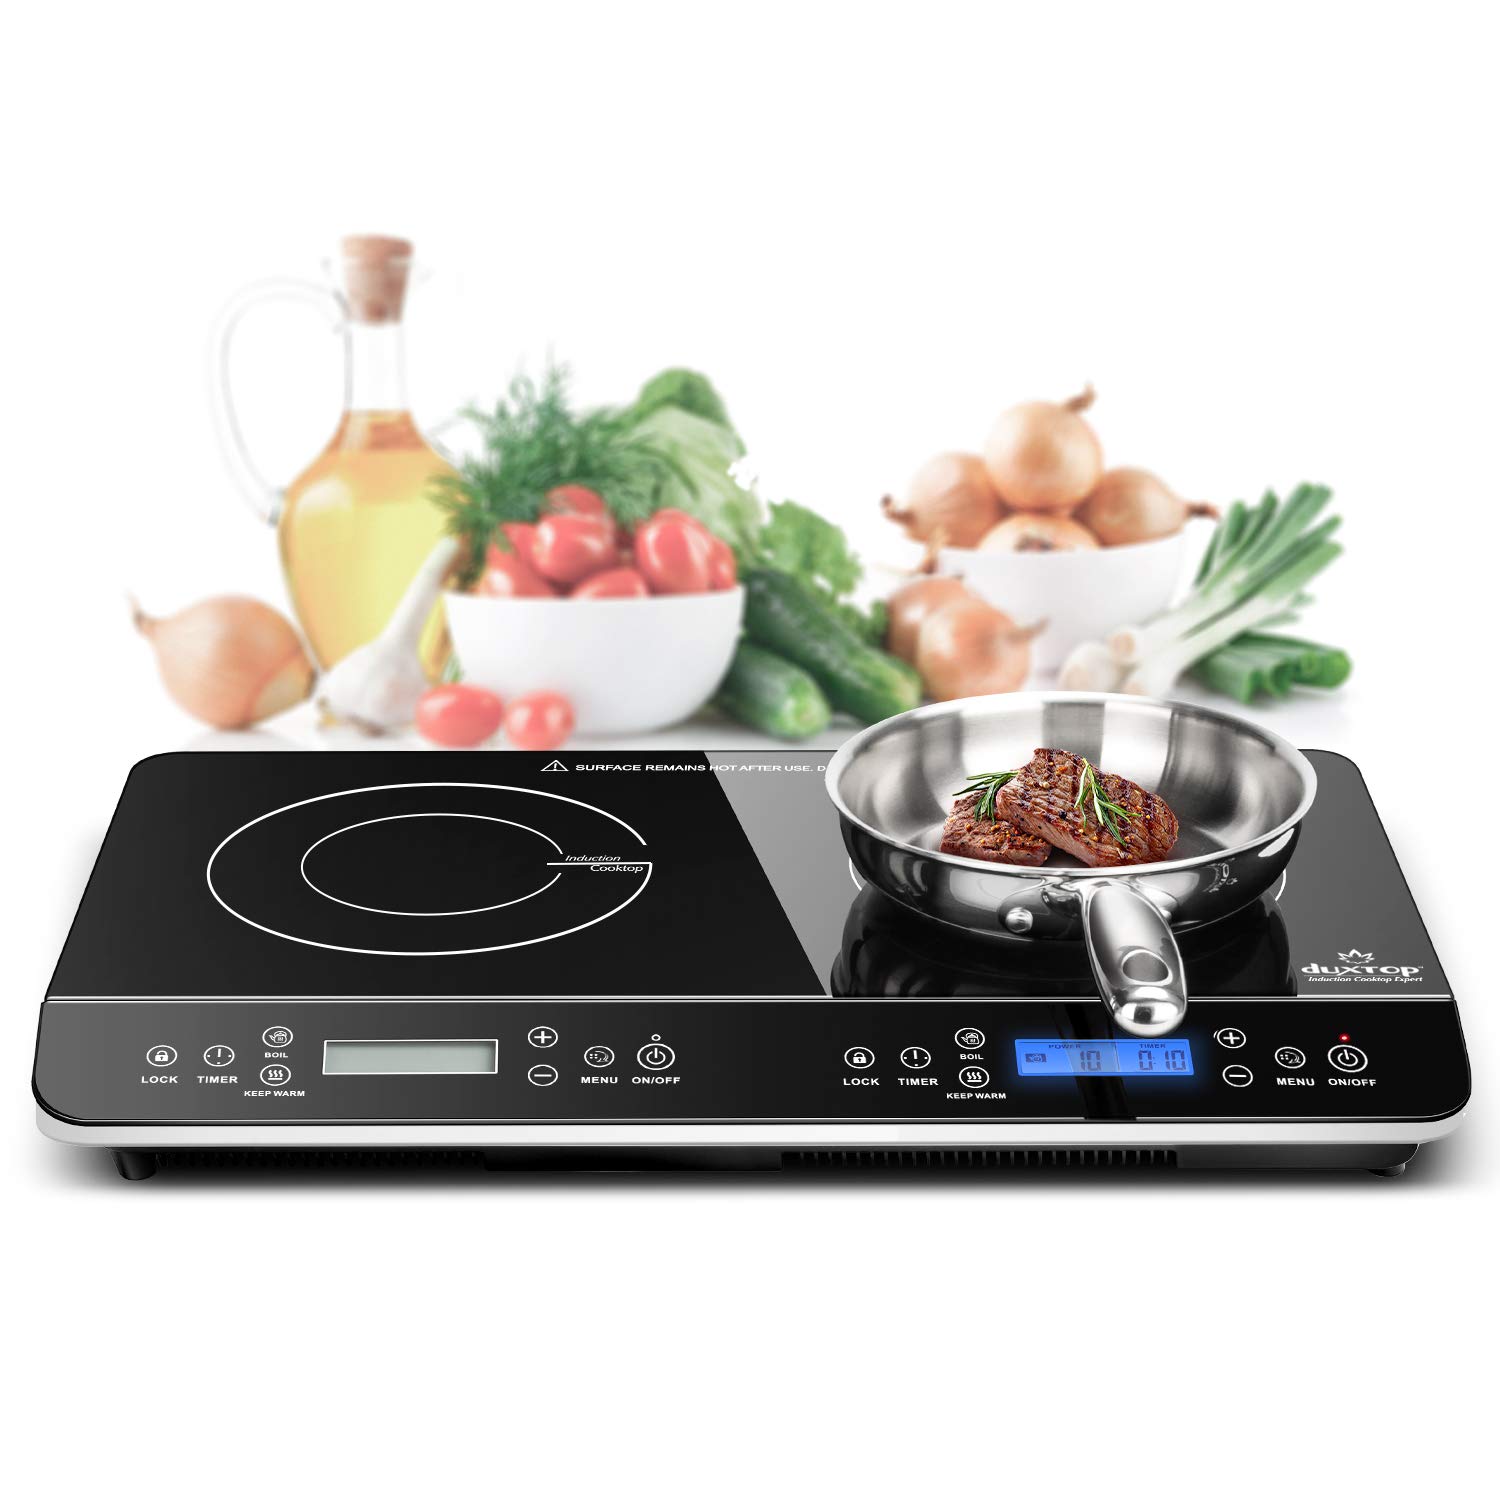 Duxtop LCD Portable Double Induction Cooktop, 1800W Best Offer